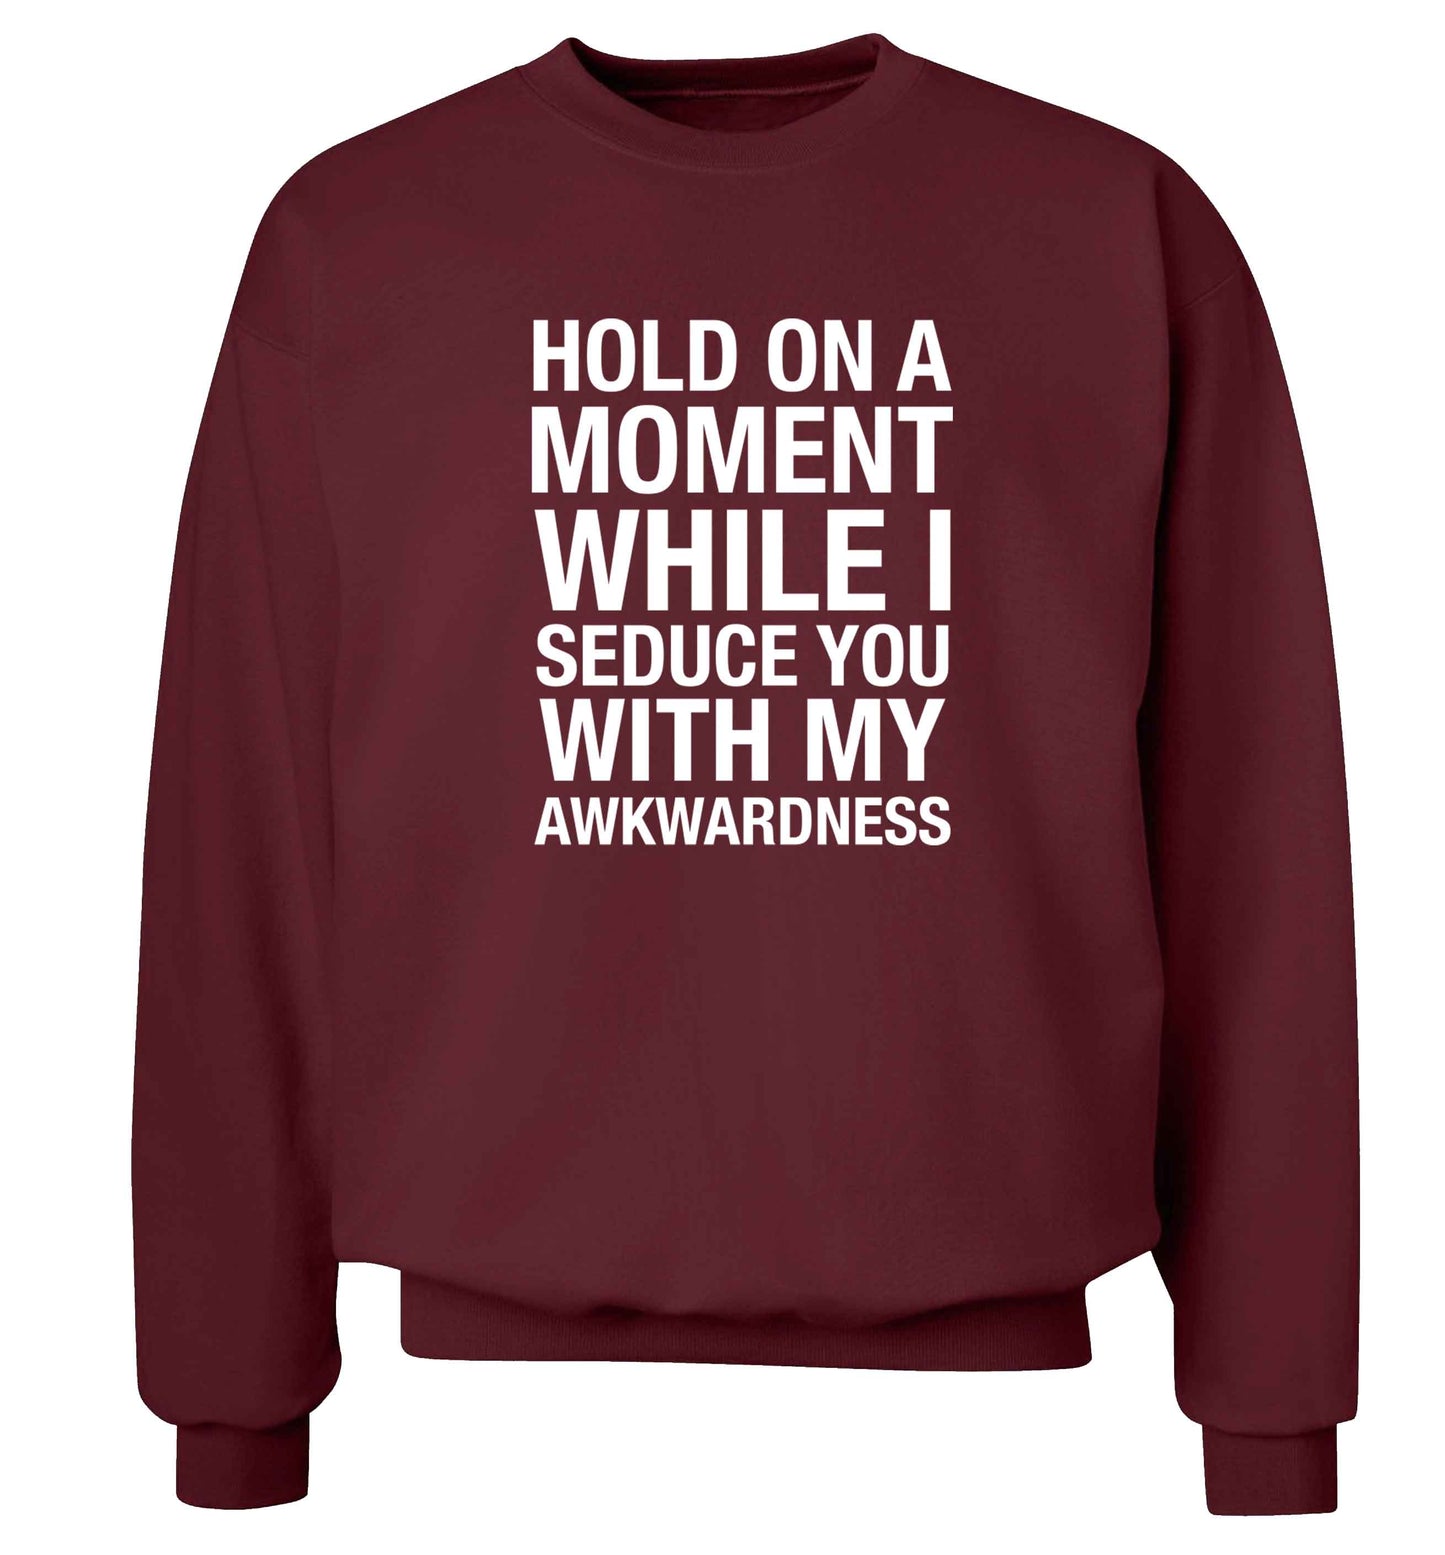 Hold on a moment while I seduce you with my awkwardness adult's unisex maroon sweater 2XL